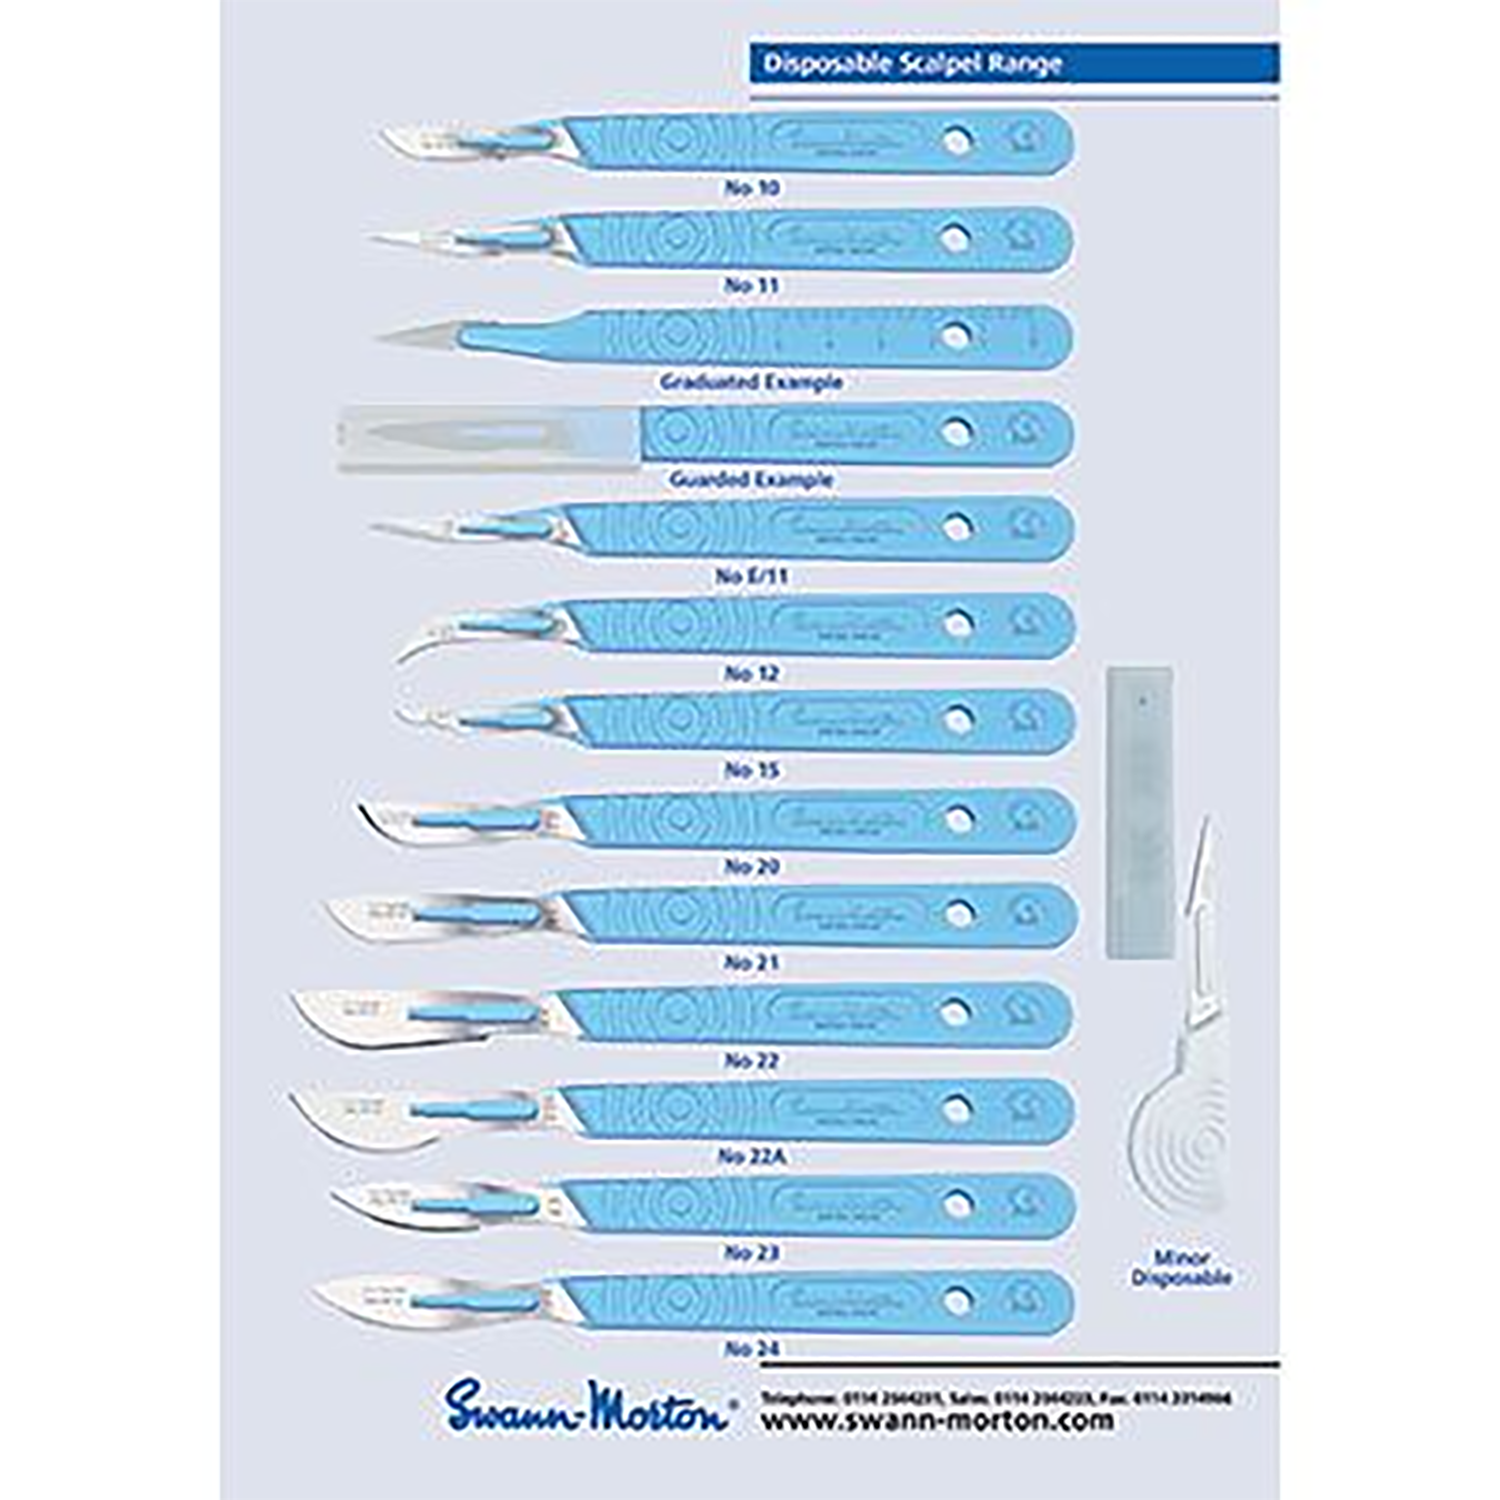 One Way Valve Mouthpieces Inspiratory Clement Clarke - McArthur Medical  Sales Inc.